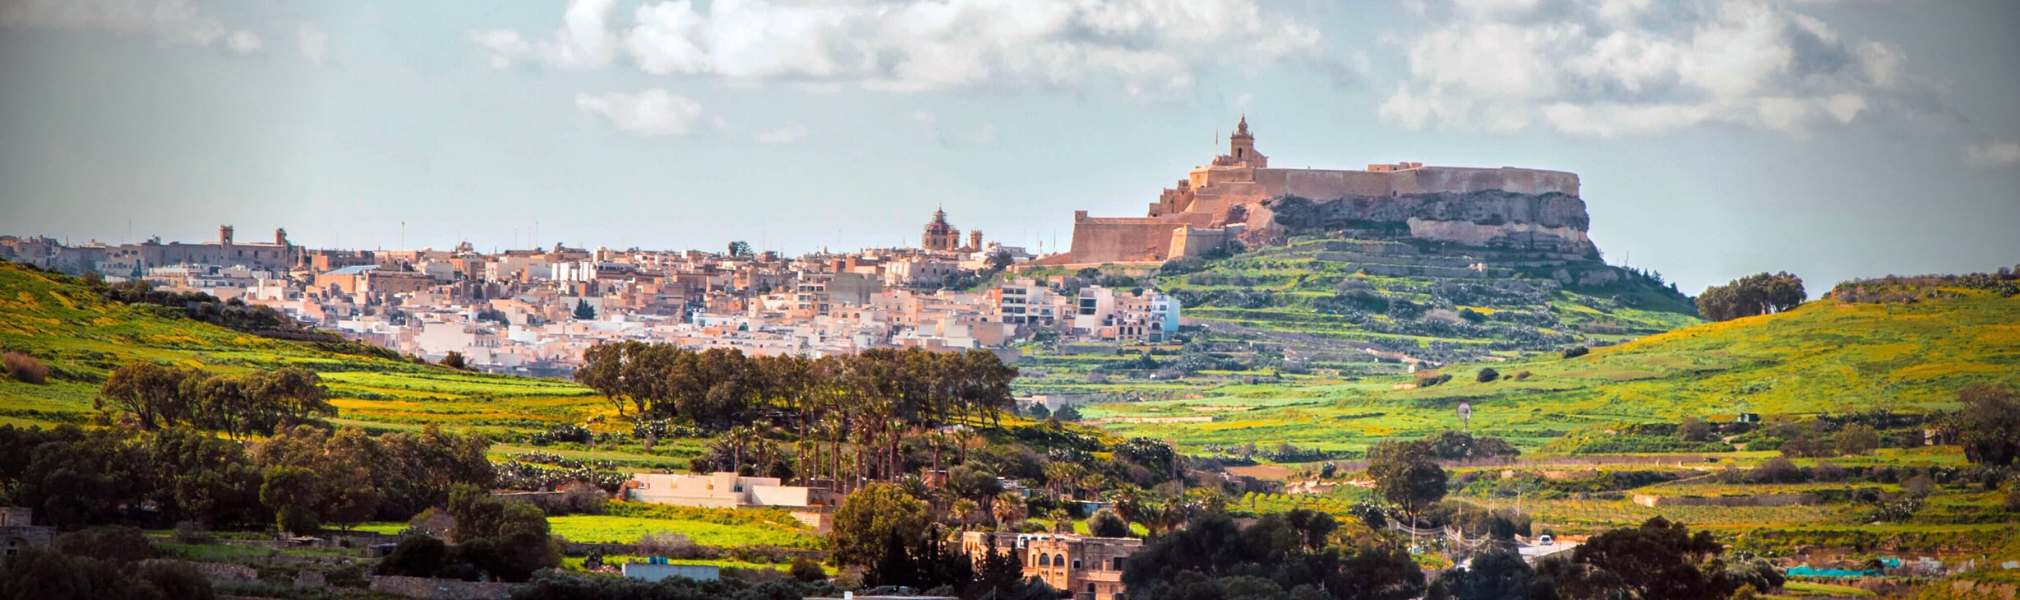 Spring In Malta: Best Things To Do & See